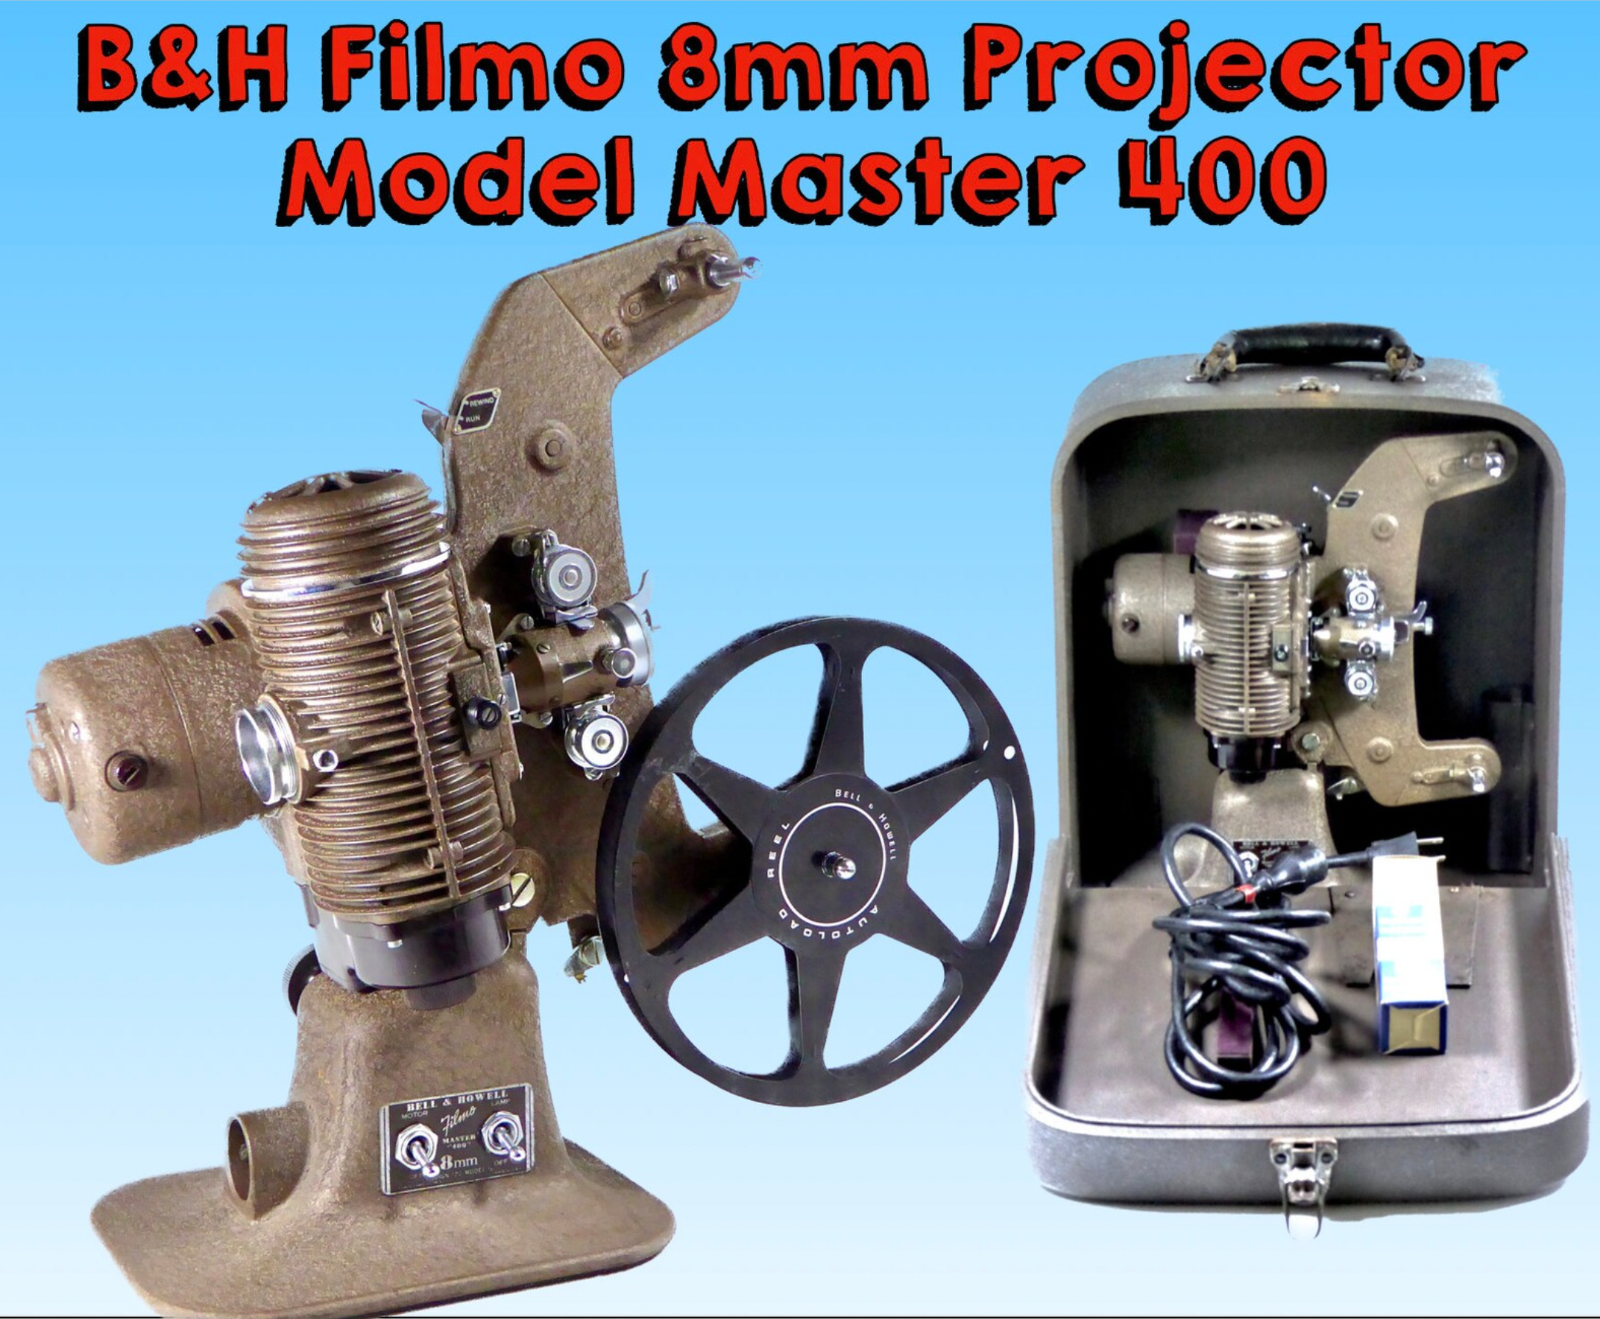 25% PRICE DROP: Refurbished 8mm Bell & Howell 400 Movie Projector, New Bulb - $134.99